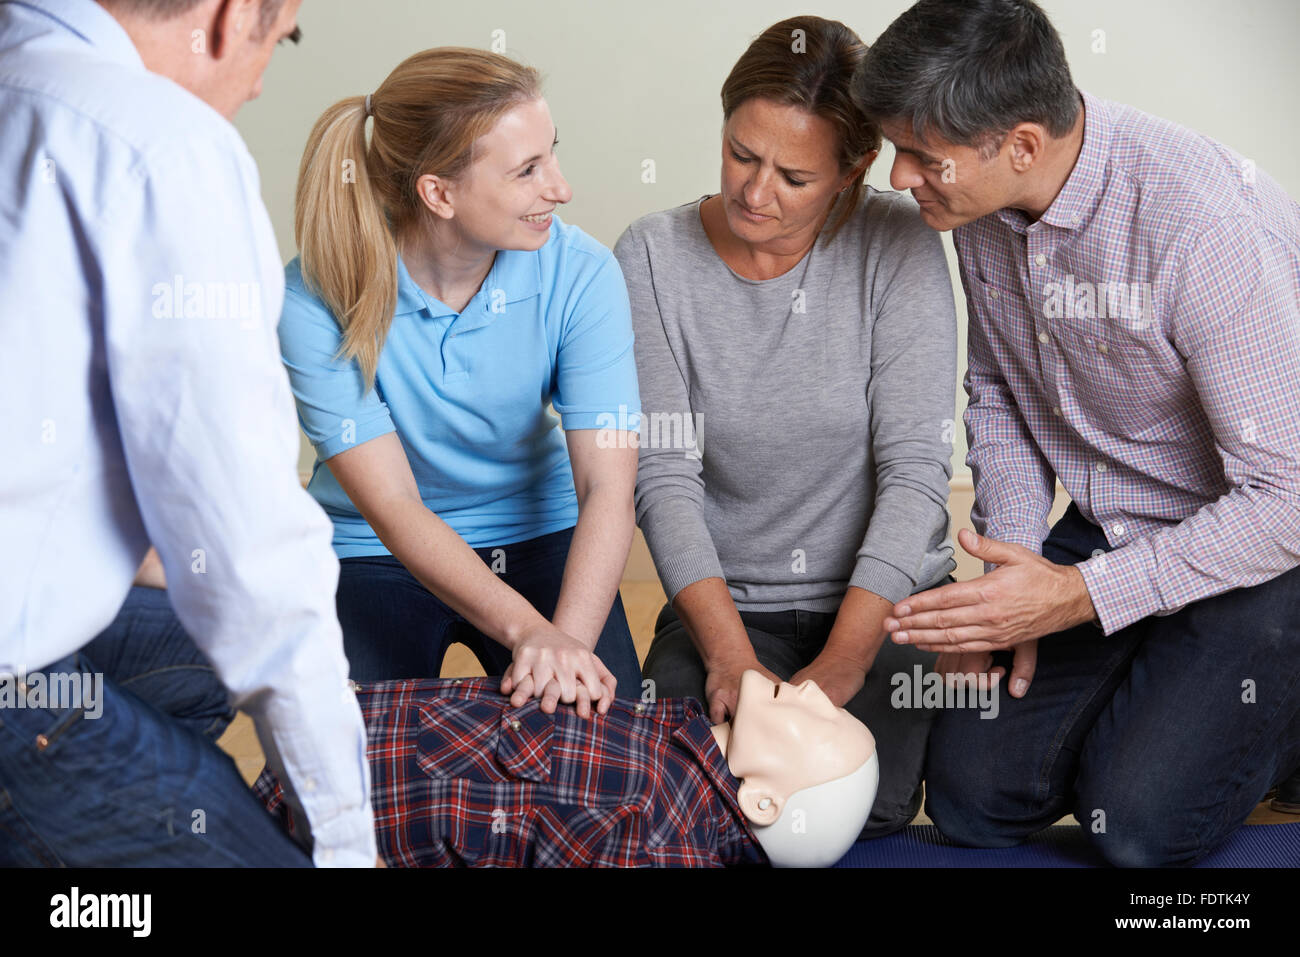 Woman Demonstrating CPR On Training Dummy In First Aid Class Stock Photo